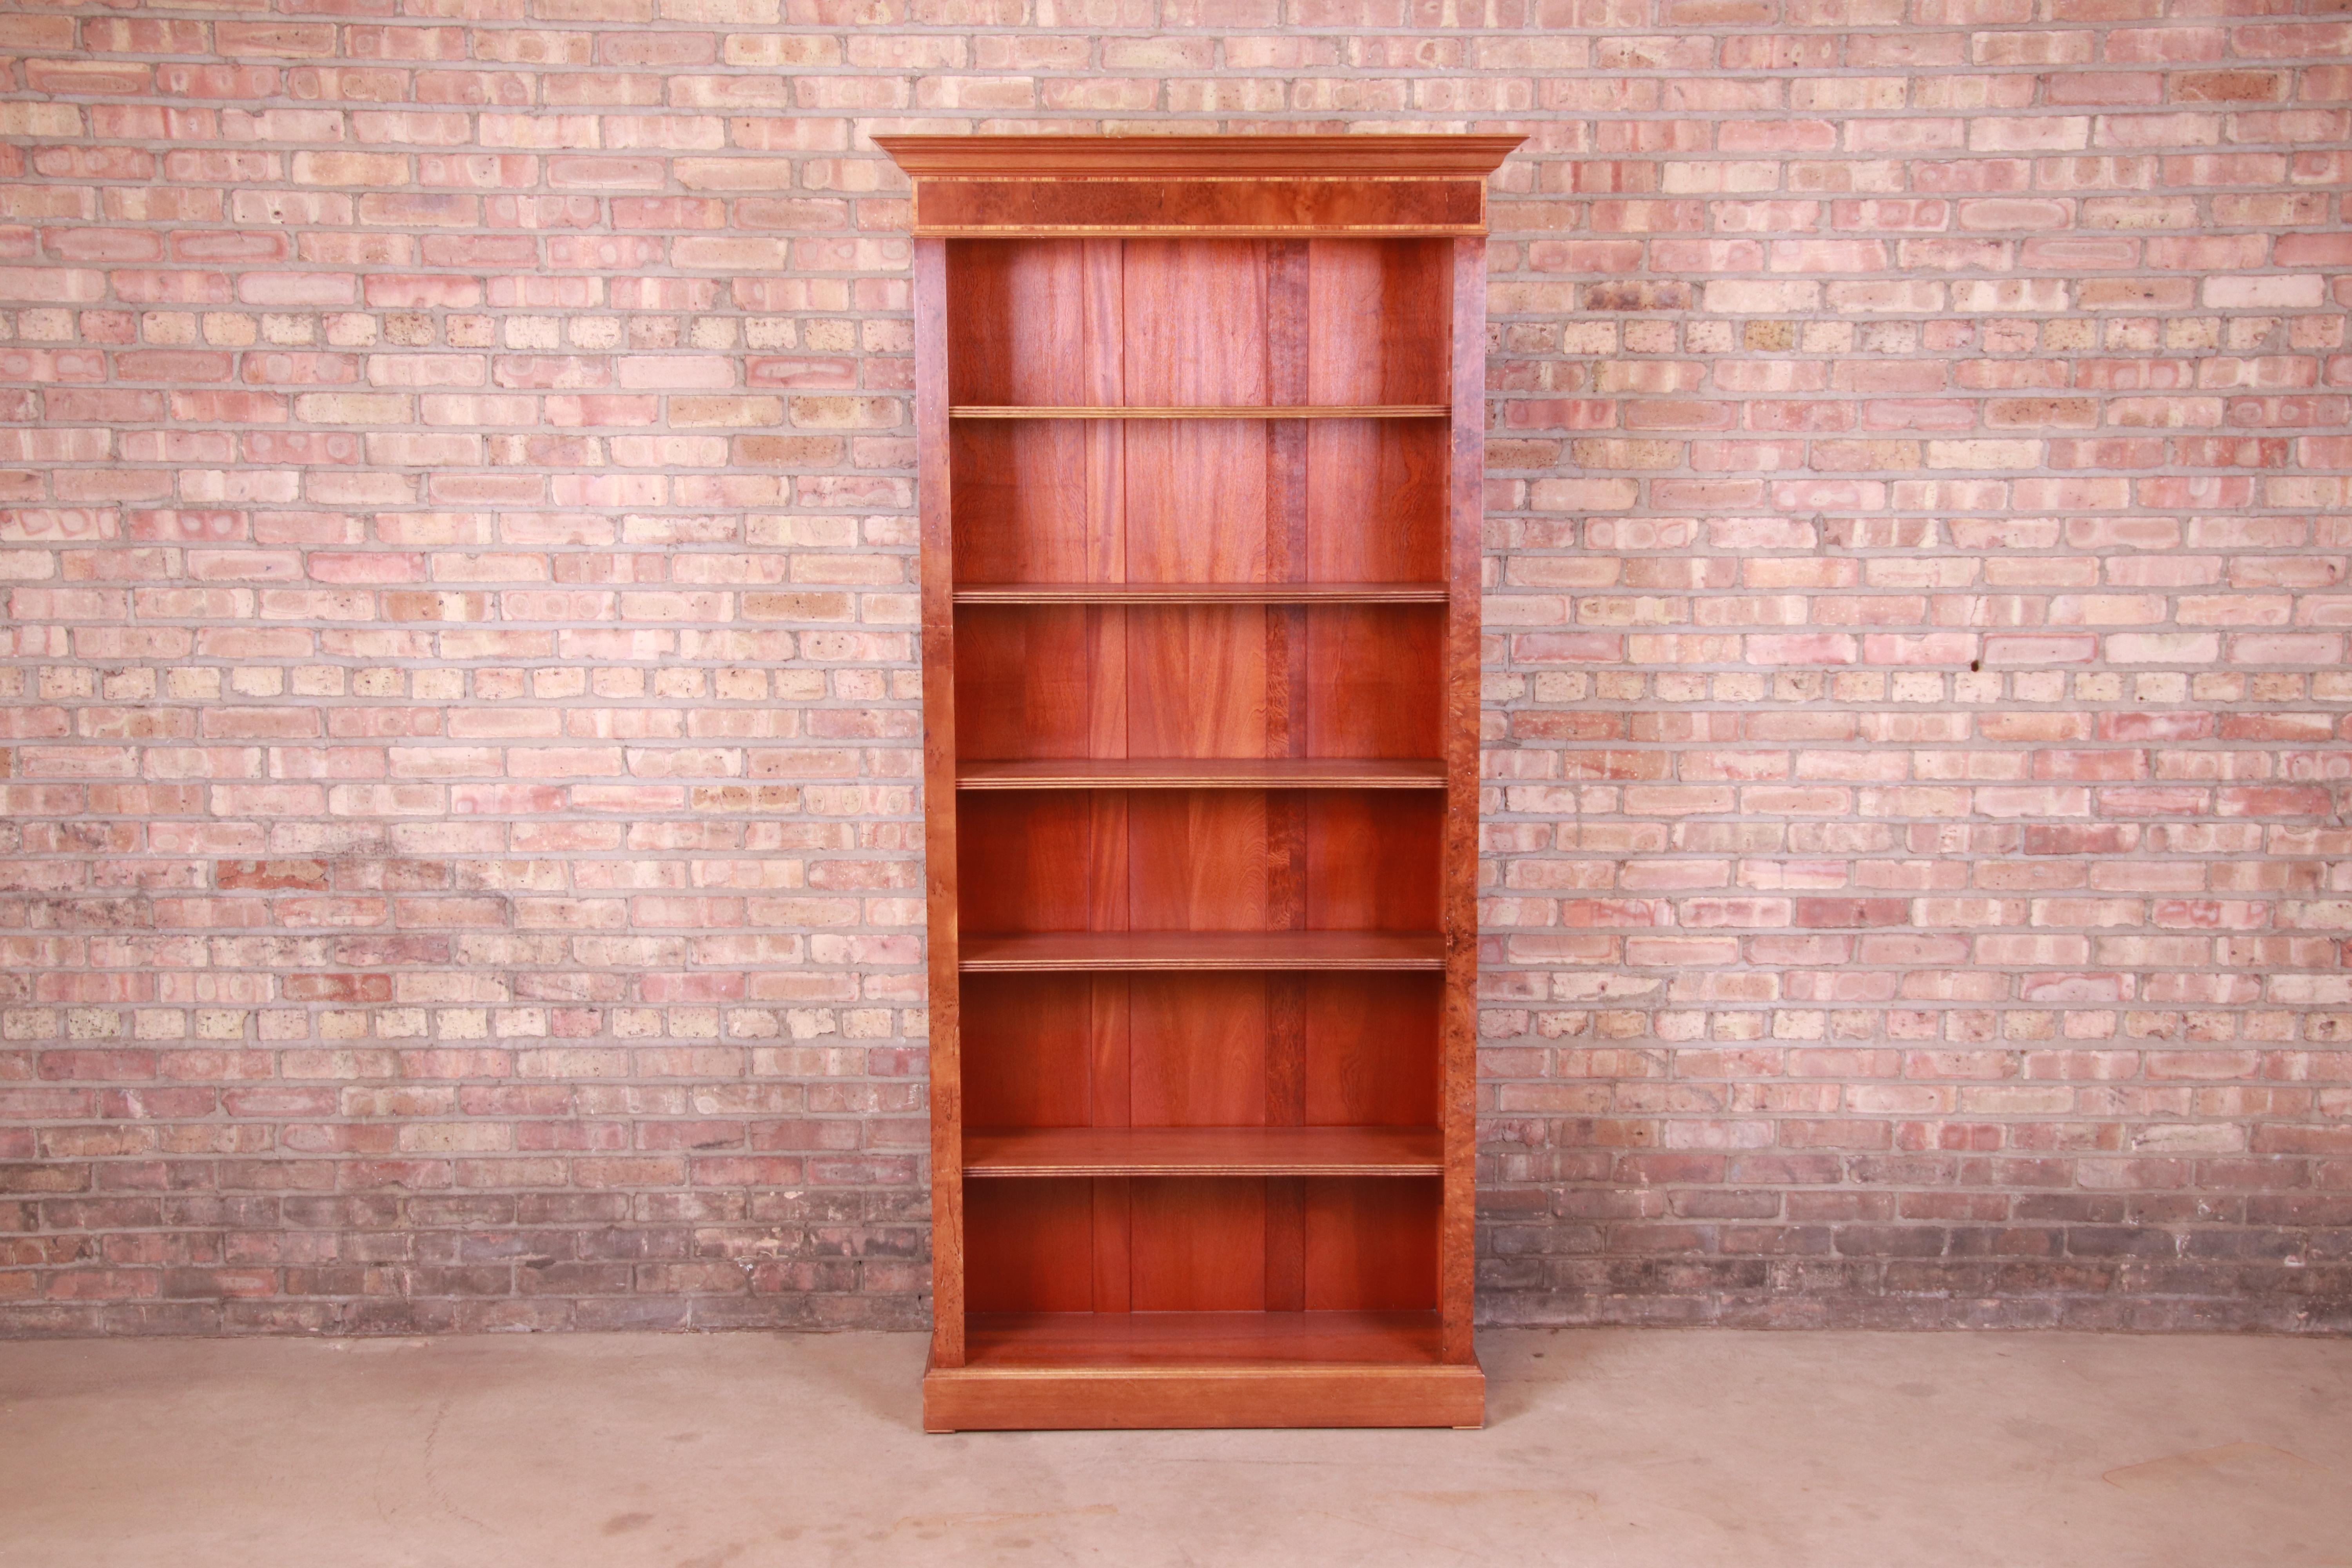 A gorgeous Victorian style burled walnut and English yew wood tall bookcase

Mid-20th Century

Measures: 40